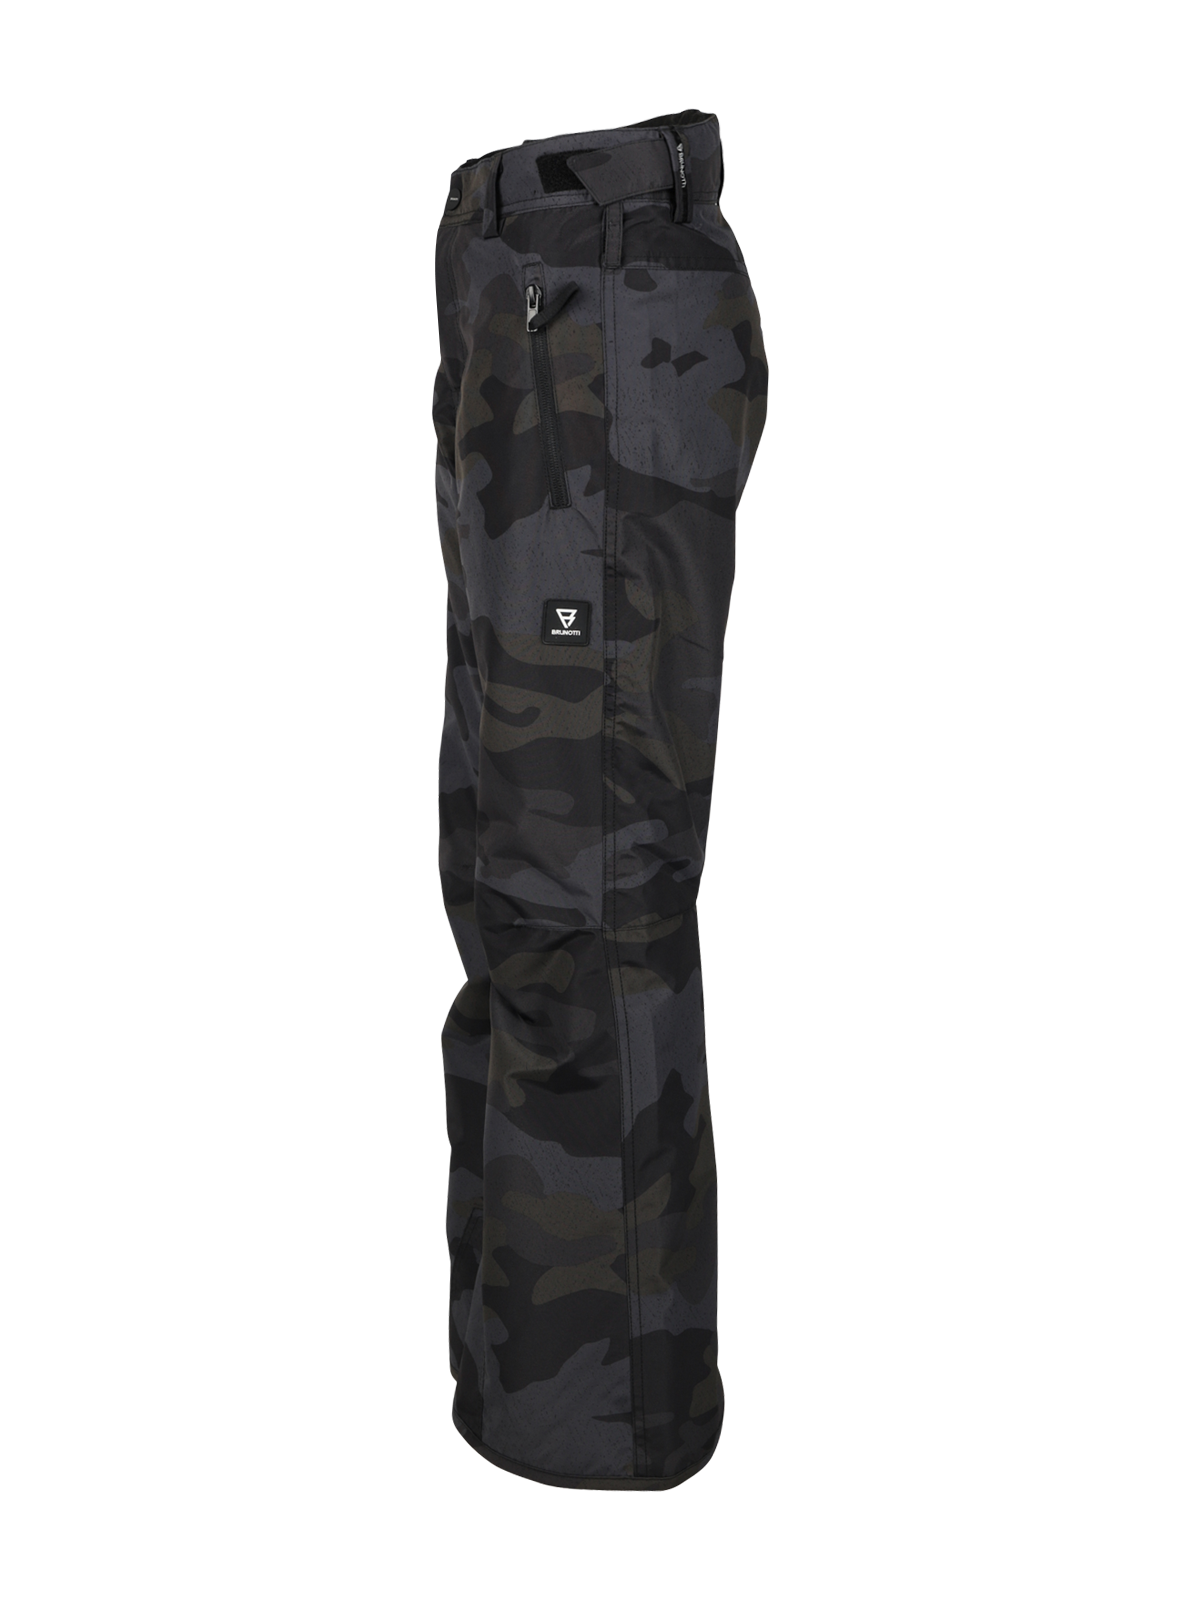 Footraily-AO Jungen Skihose | Camouflage Grau